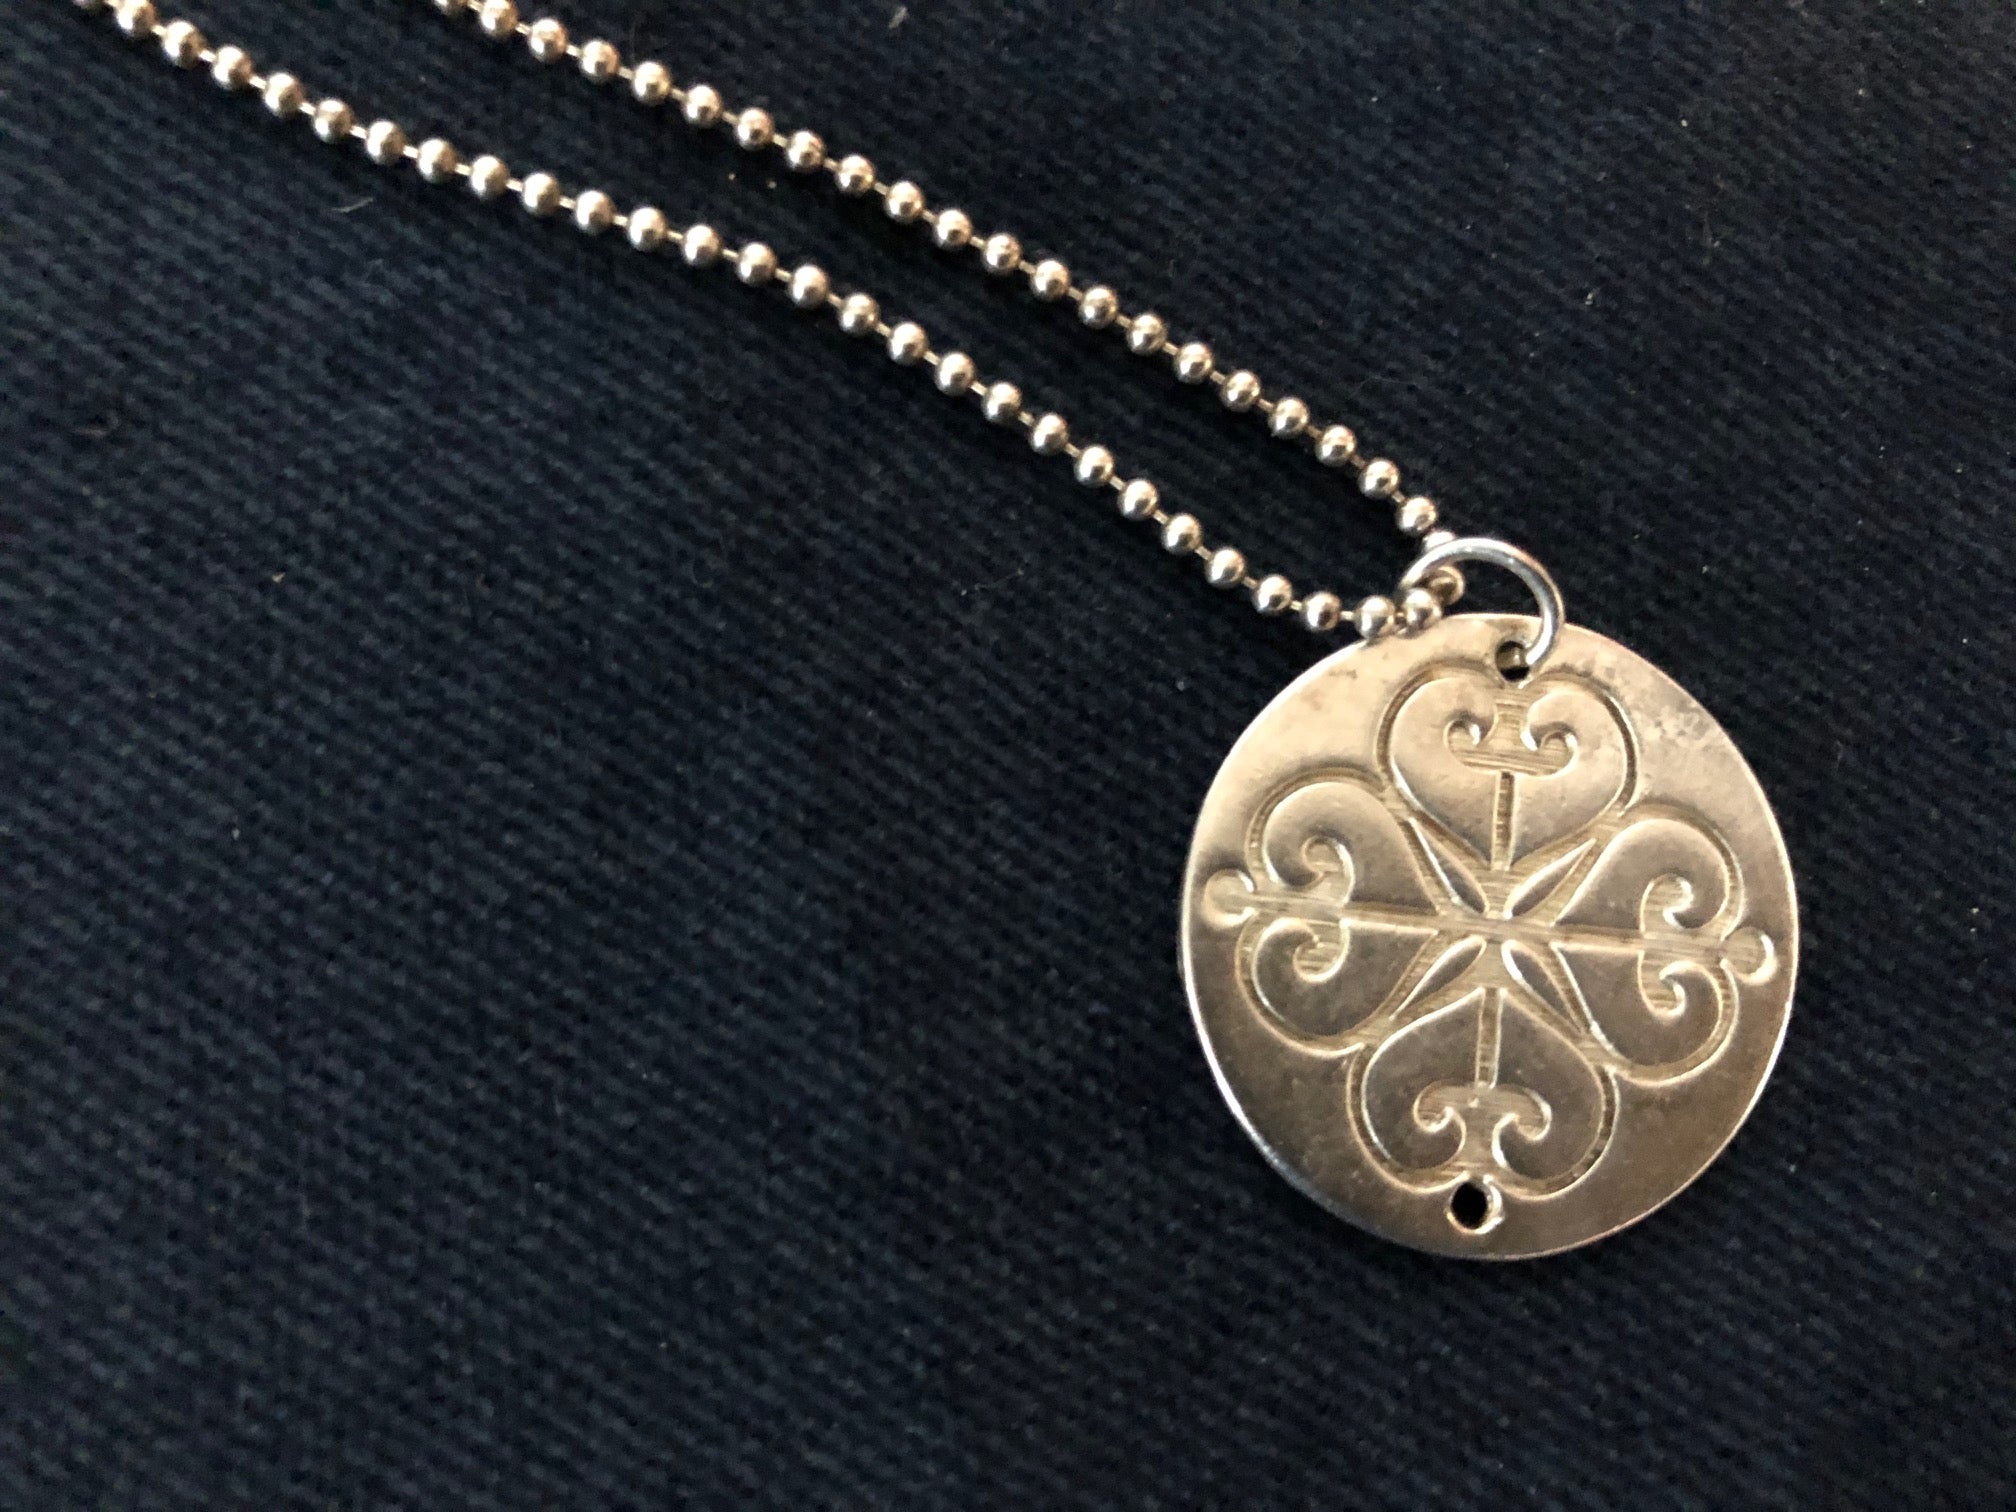 Silver Plated Medallion Necklace